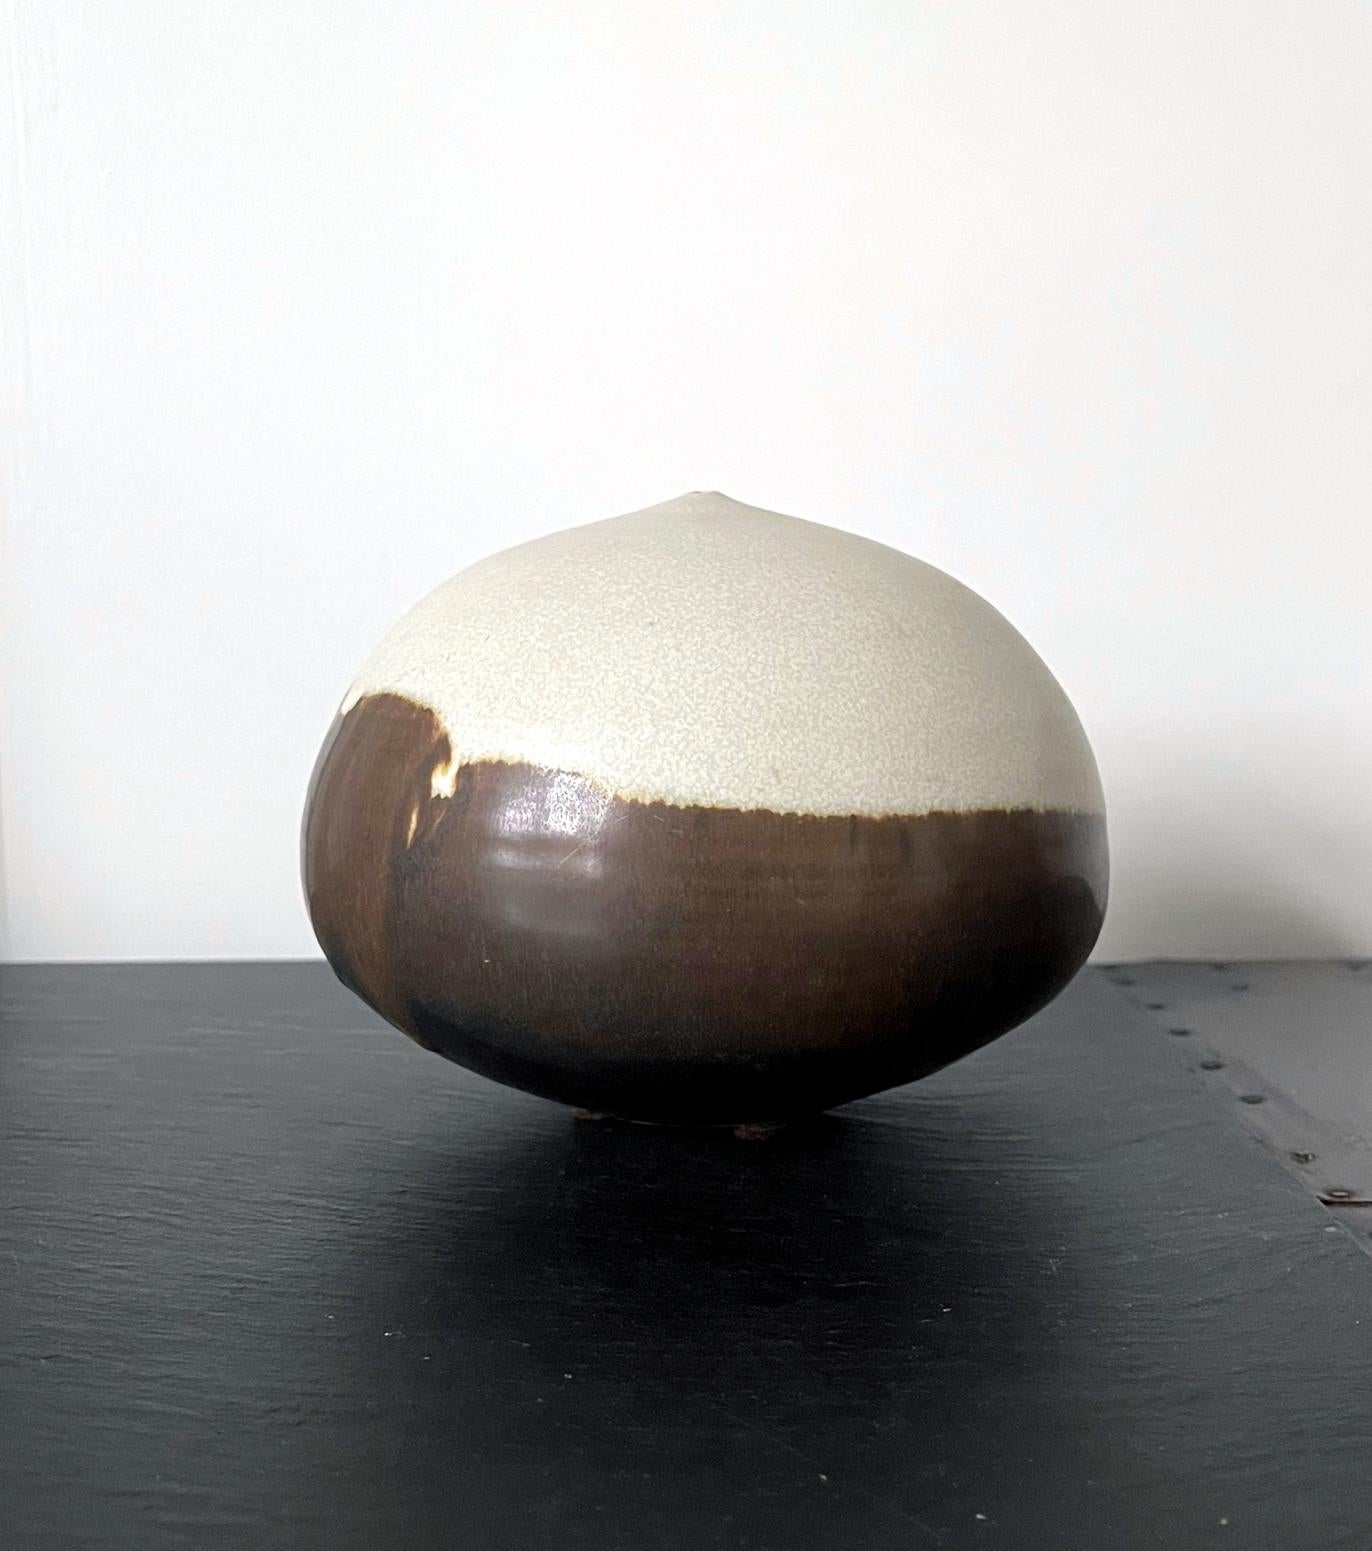 Modern Ceramic Closed Form Vessel with Rattle by Toshiko Takaezu